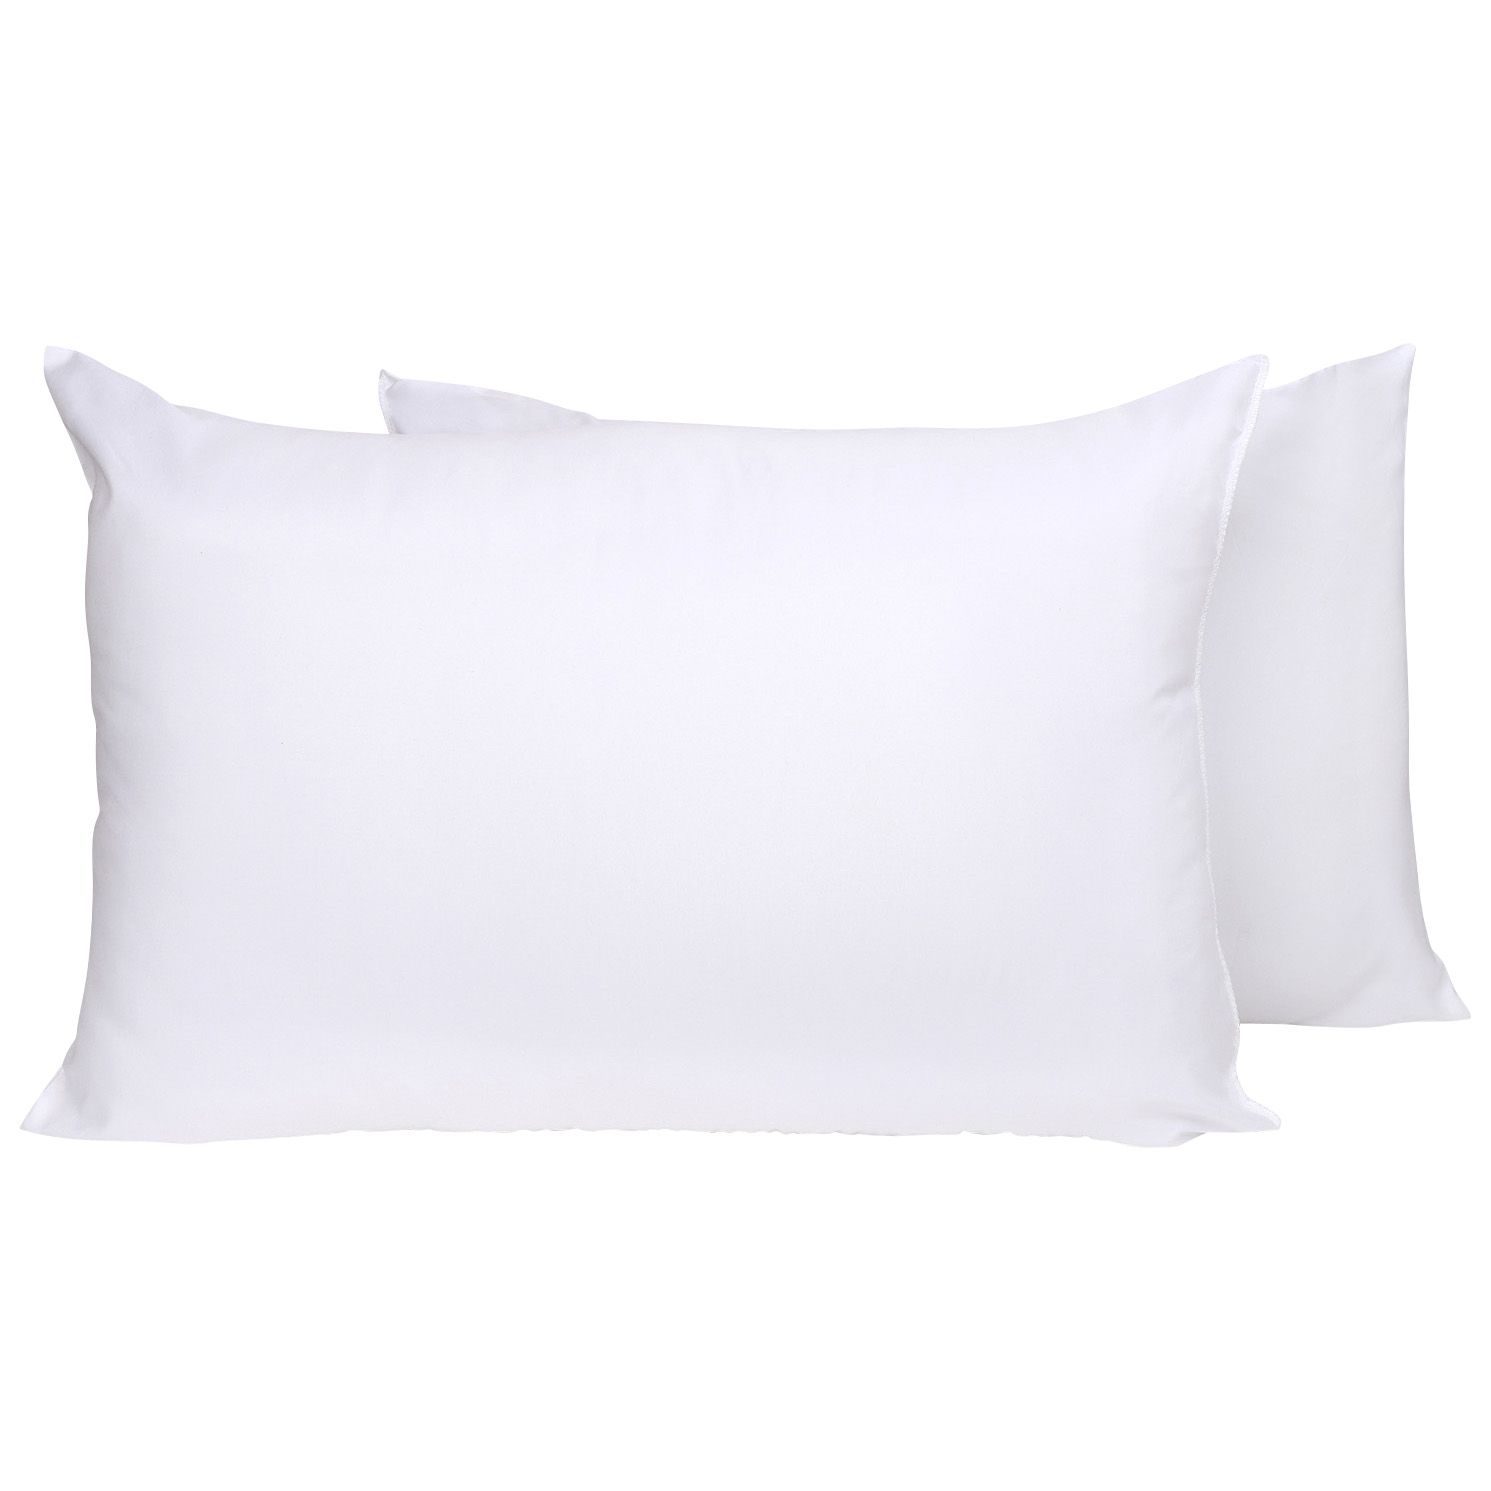  DreamSleep Home Gusseted Quilted Pillow, Standard